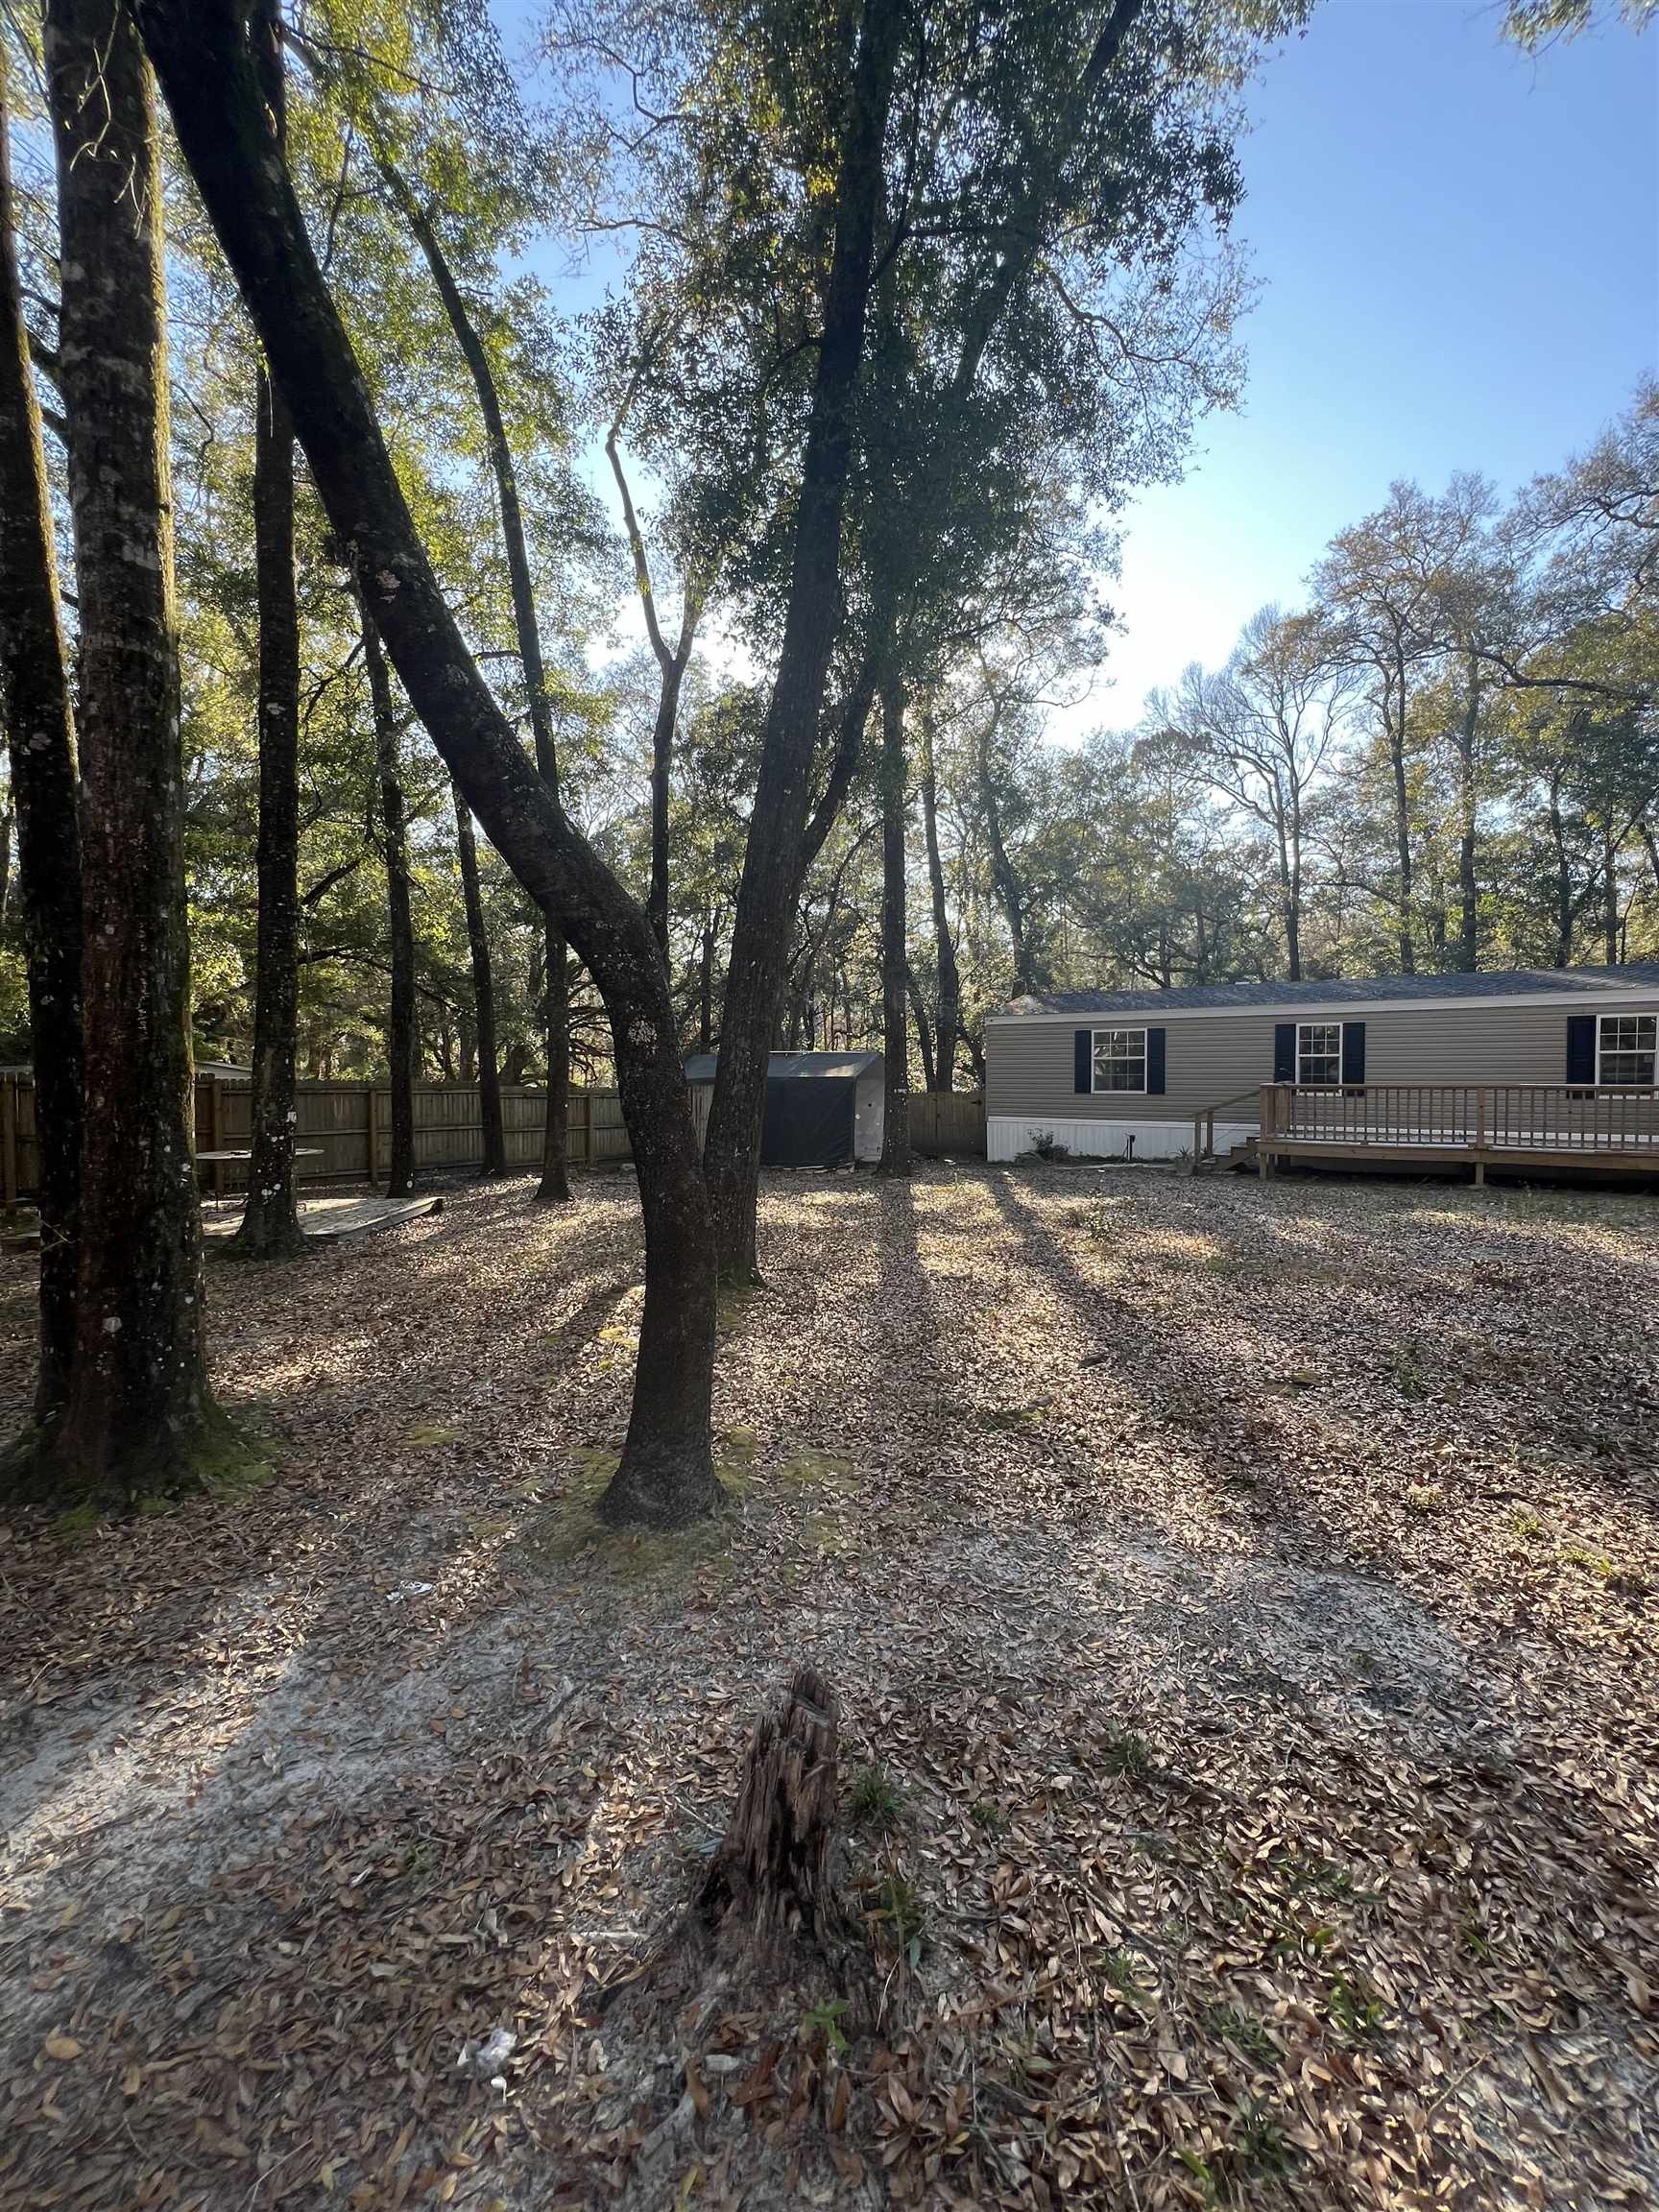 4282 W Bark Drive,TALLAHASSEE,Florida 32305,2 Bedrooms Bedrooms,2 BathroomsBathrooms,Manuf/mobile home,4282 W Bark Drive,368815